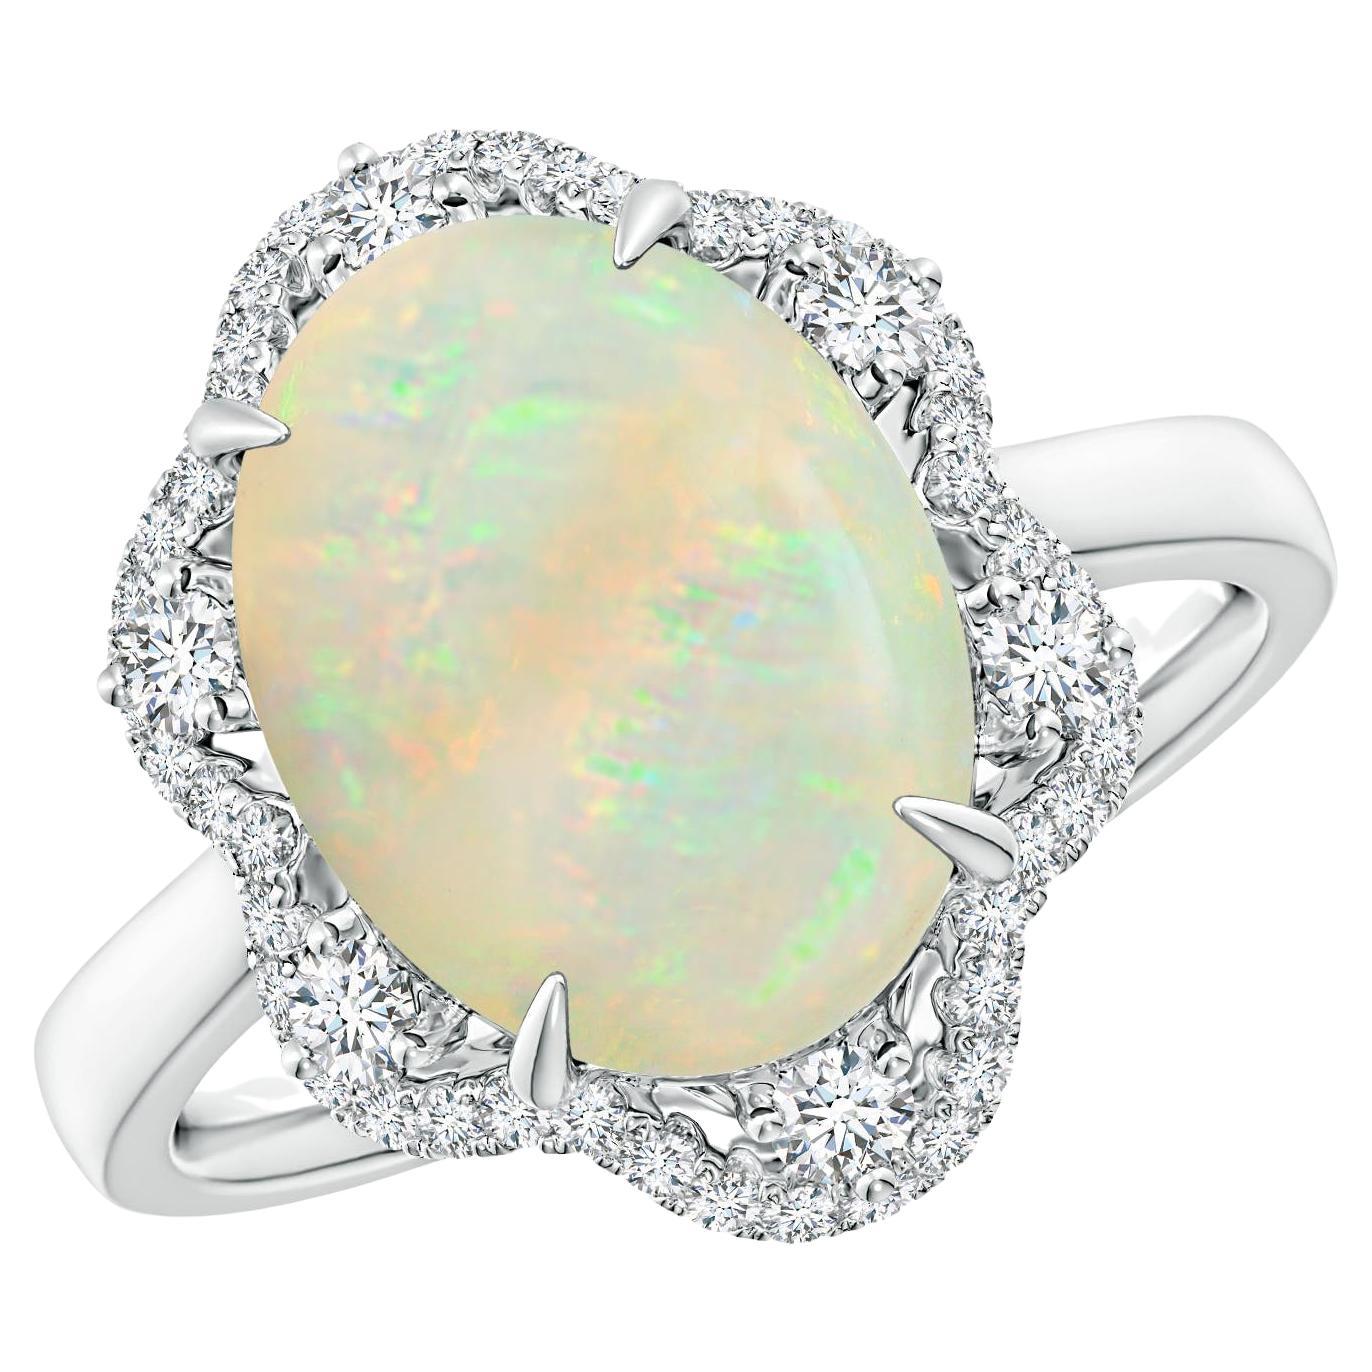 For Sale:  Angara Gia Certified Natural Opal Ring in White Gold with Reverse Tapered Shank